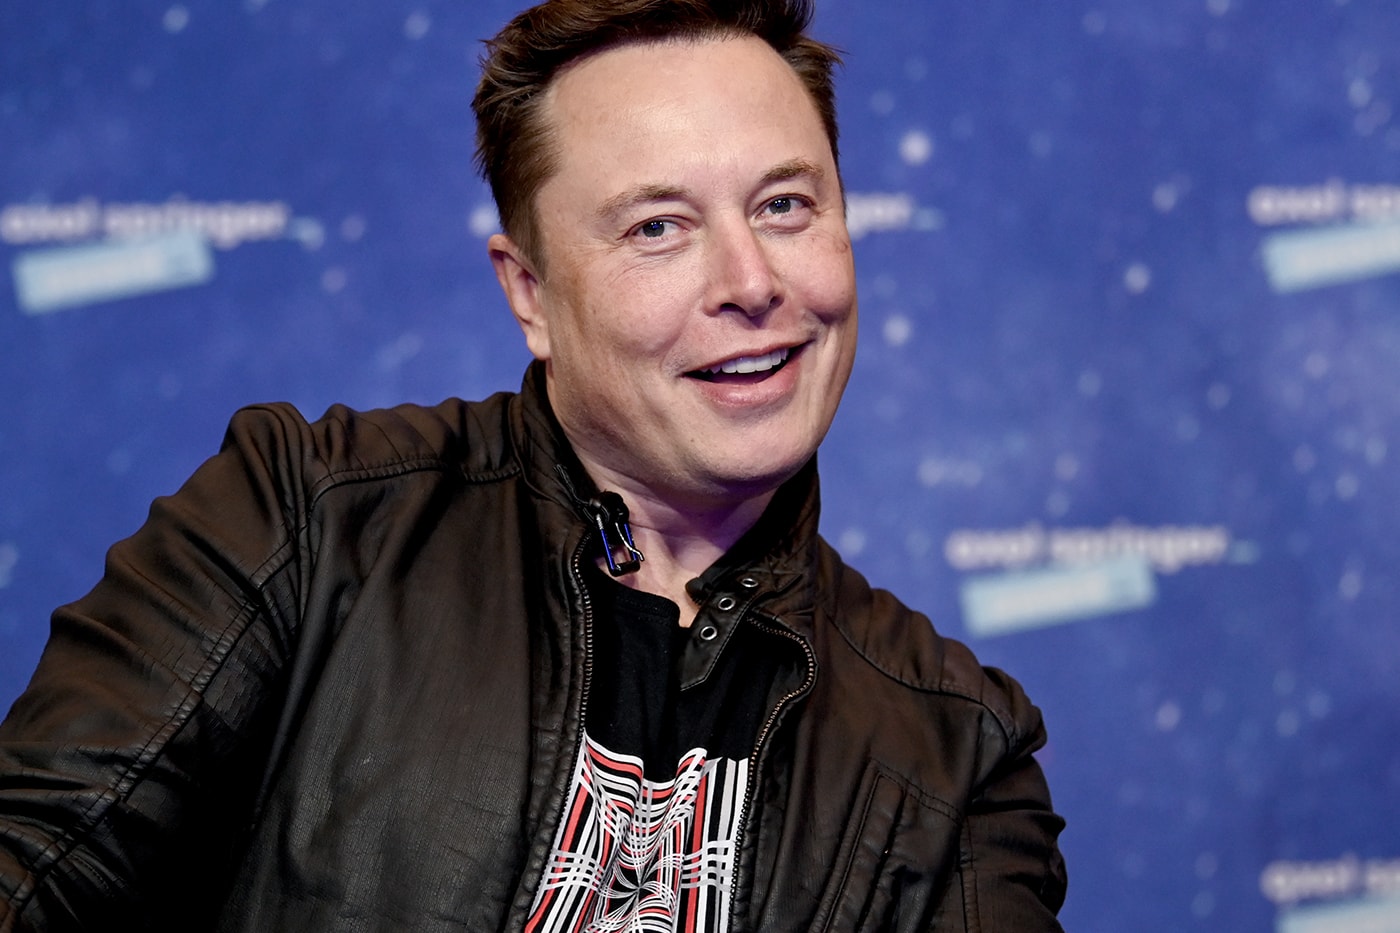 Tesla Stock Surge Elon Musk Richest Person in the World Title Again Info